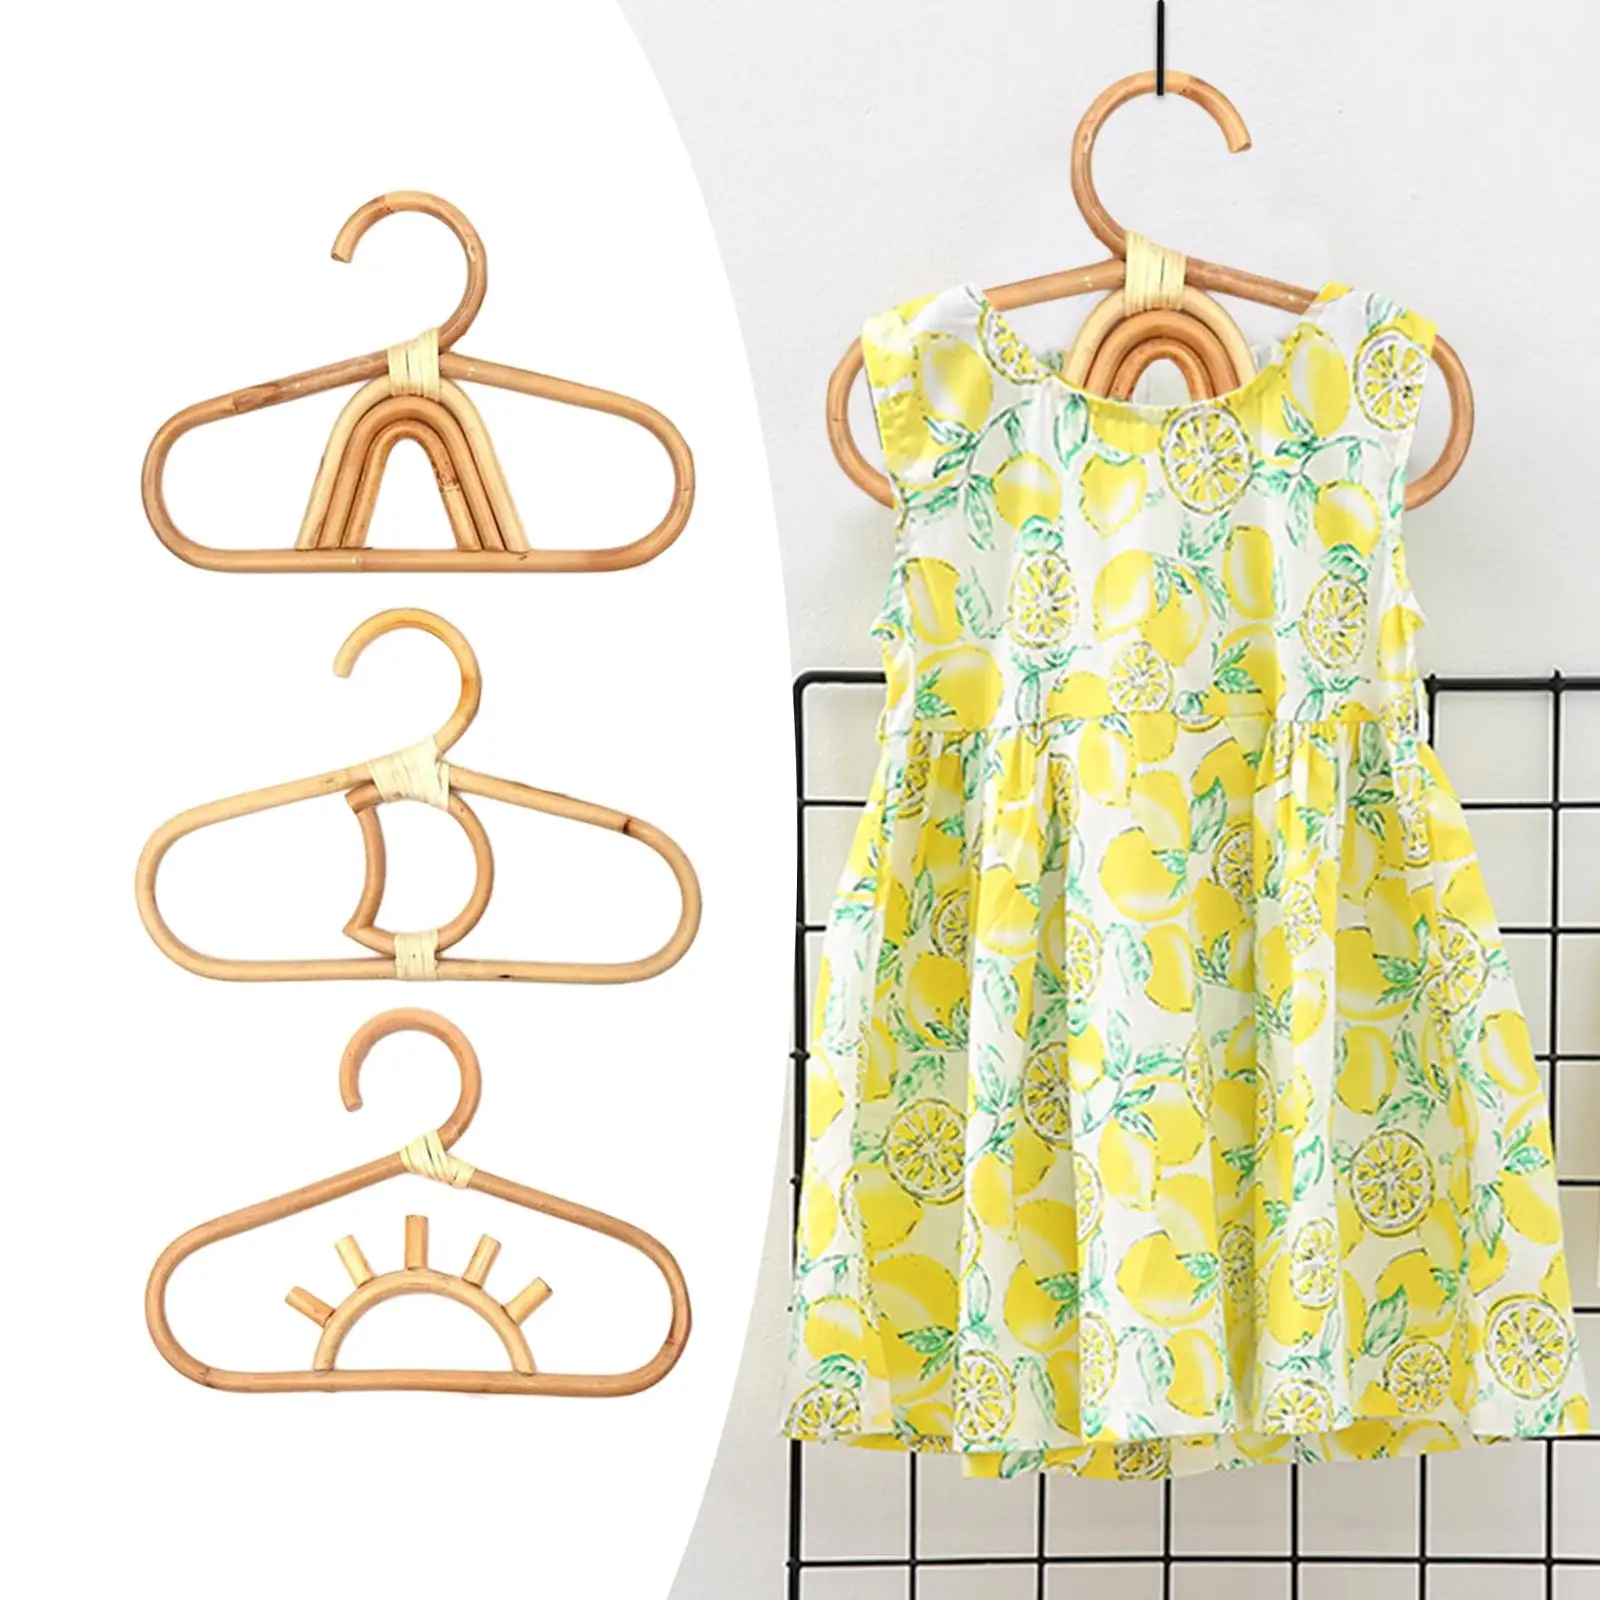 3 Pcs Kids Clothes Hanger Room Rattan Organizer Smooth Bamboo Coat Hangers Rack Clothes Hat Room Decor for Children Kids Baby